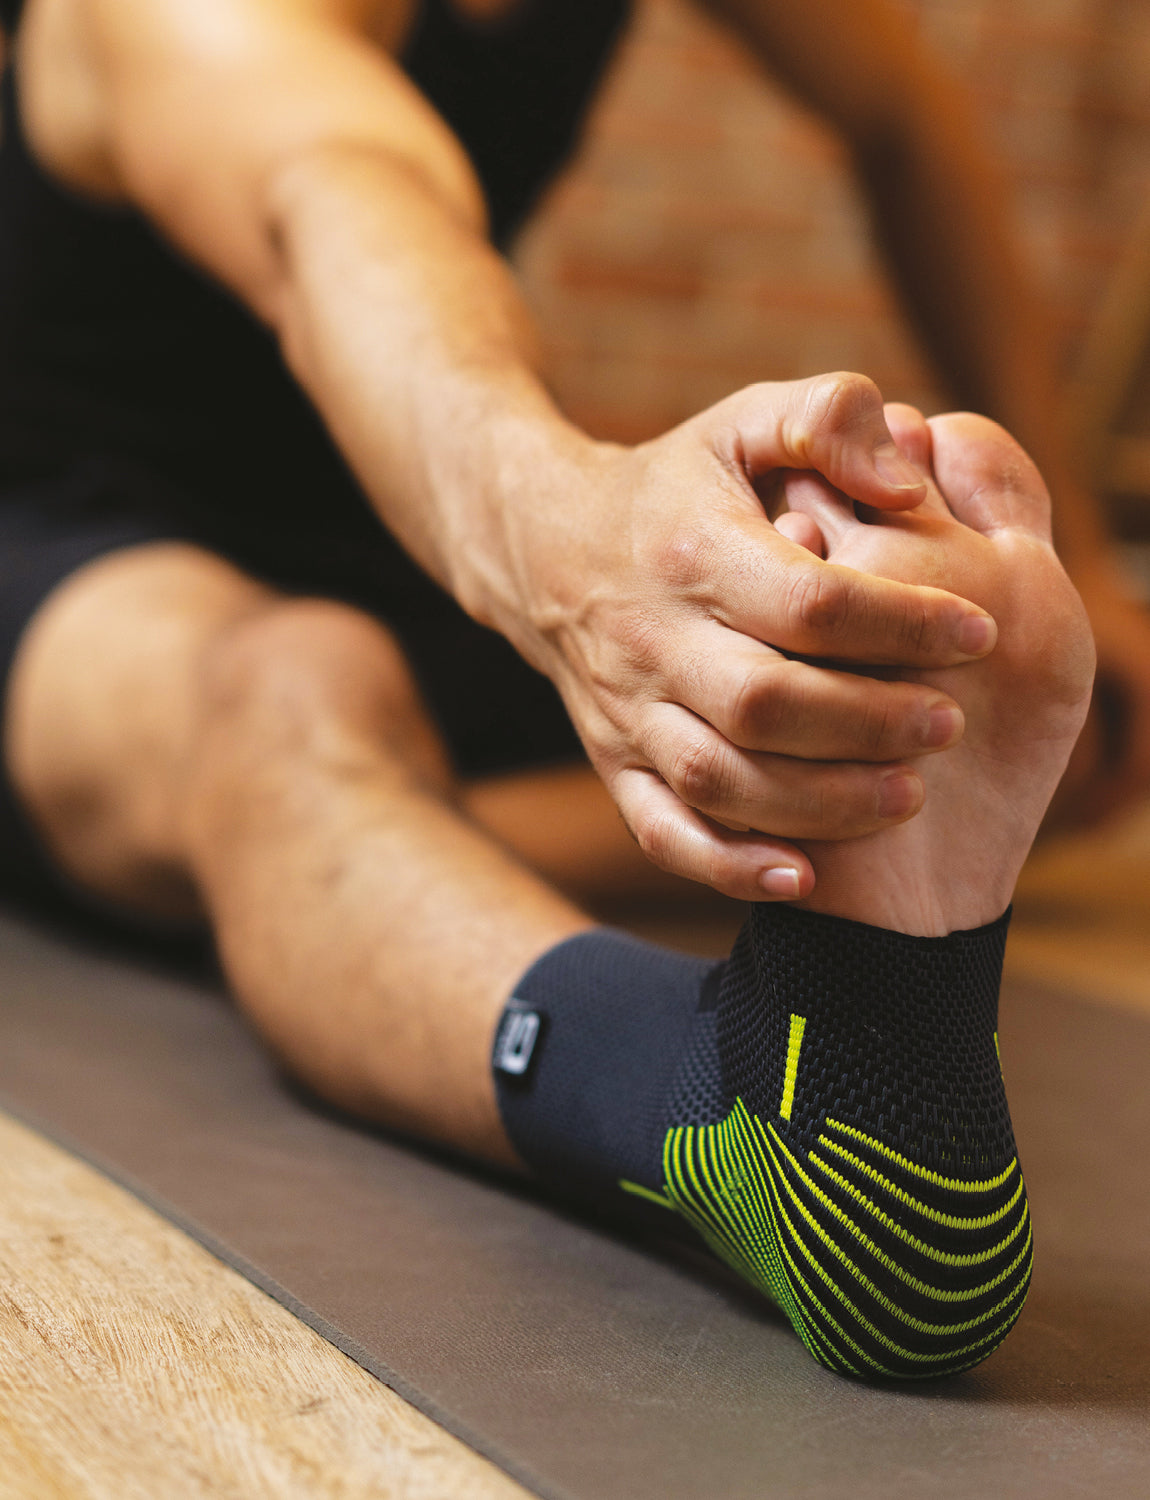 A person sitting on a yoga mat holding their foot, wearing a black and green sock with multi-zone compression, focusing on stretching or inspecting their foot, in a room with a brick wall background while using Neo G USA Active Ankle Support.